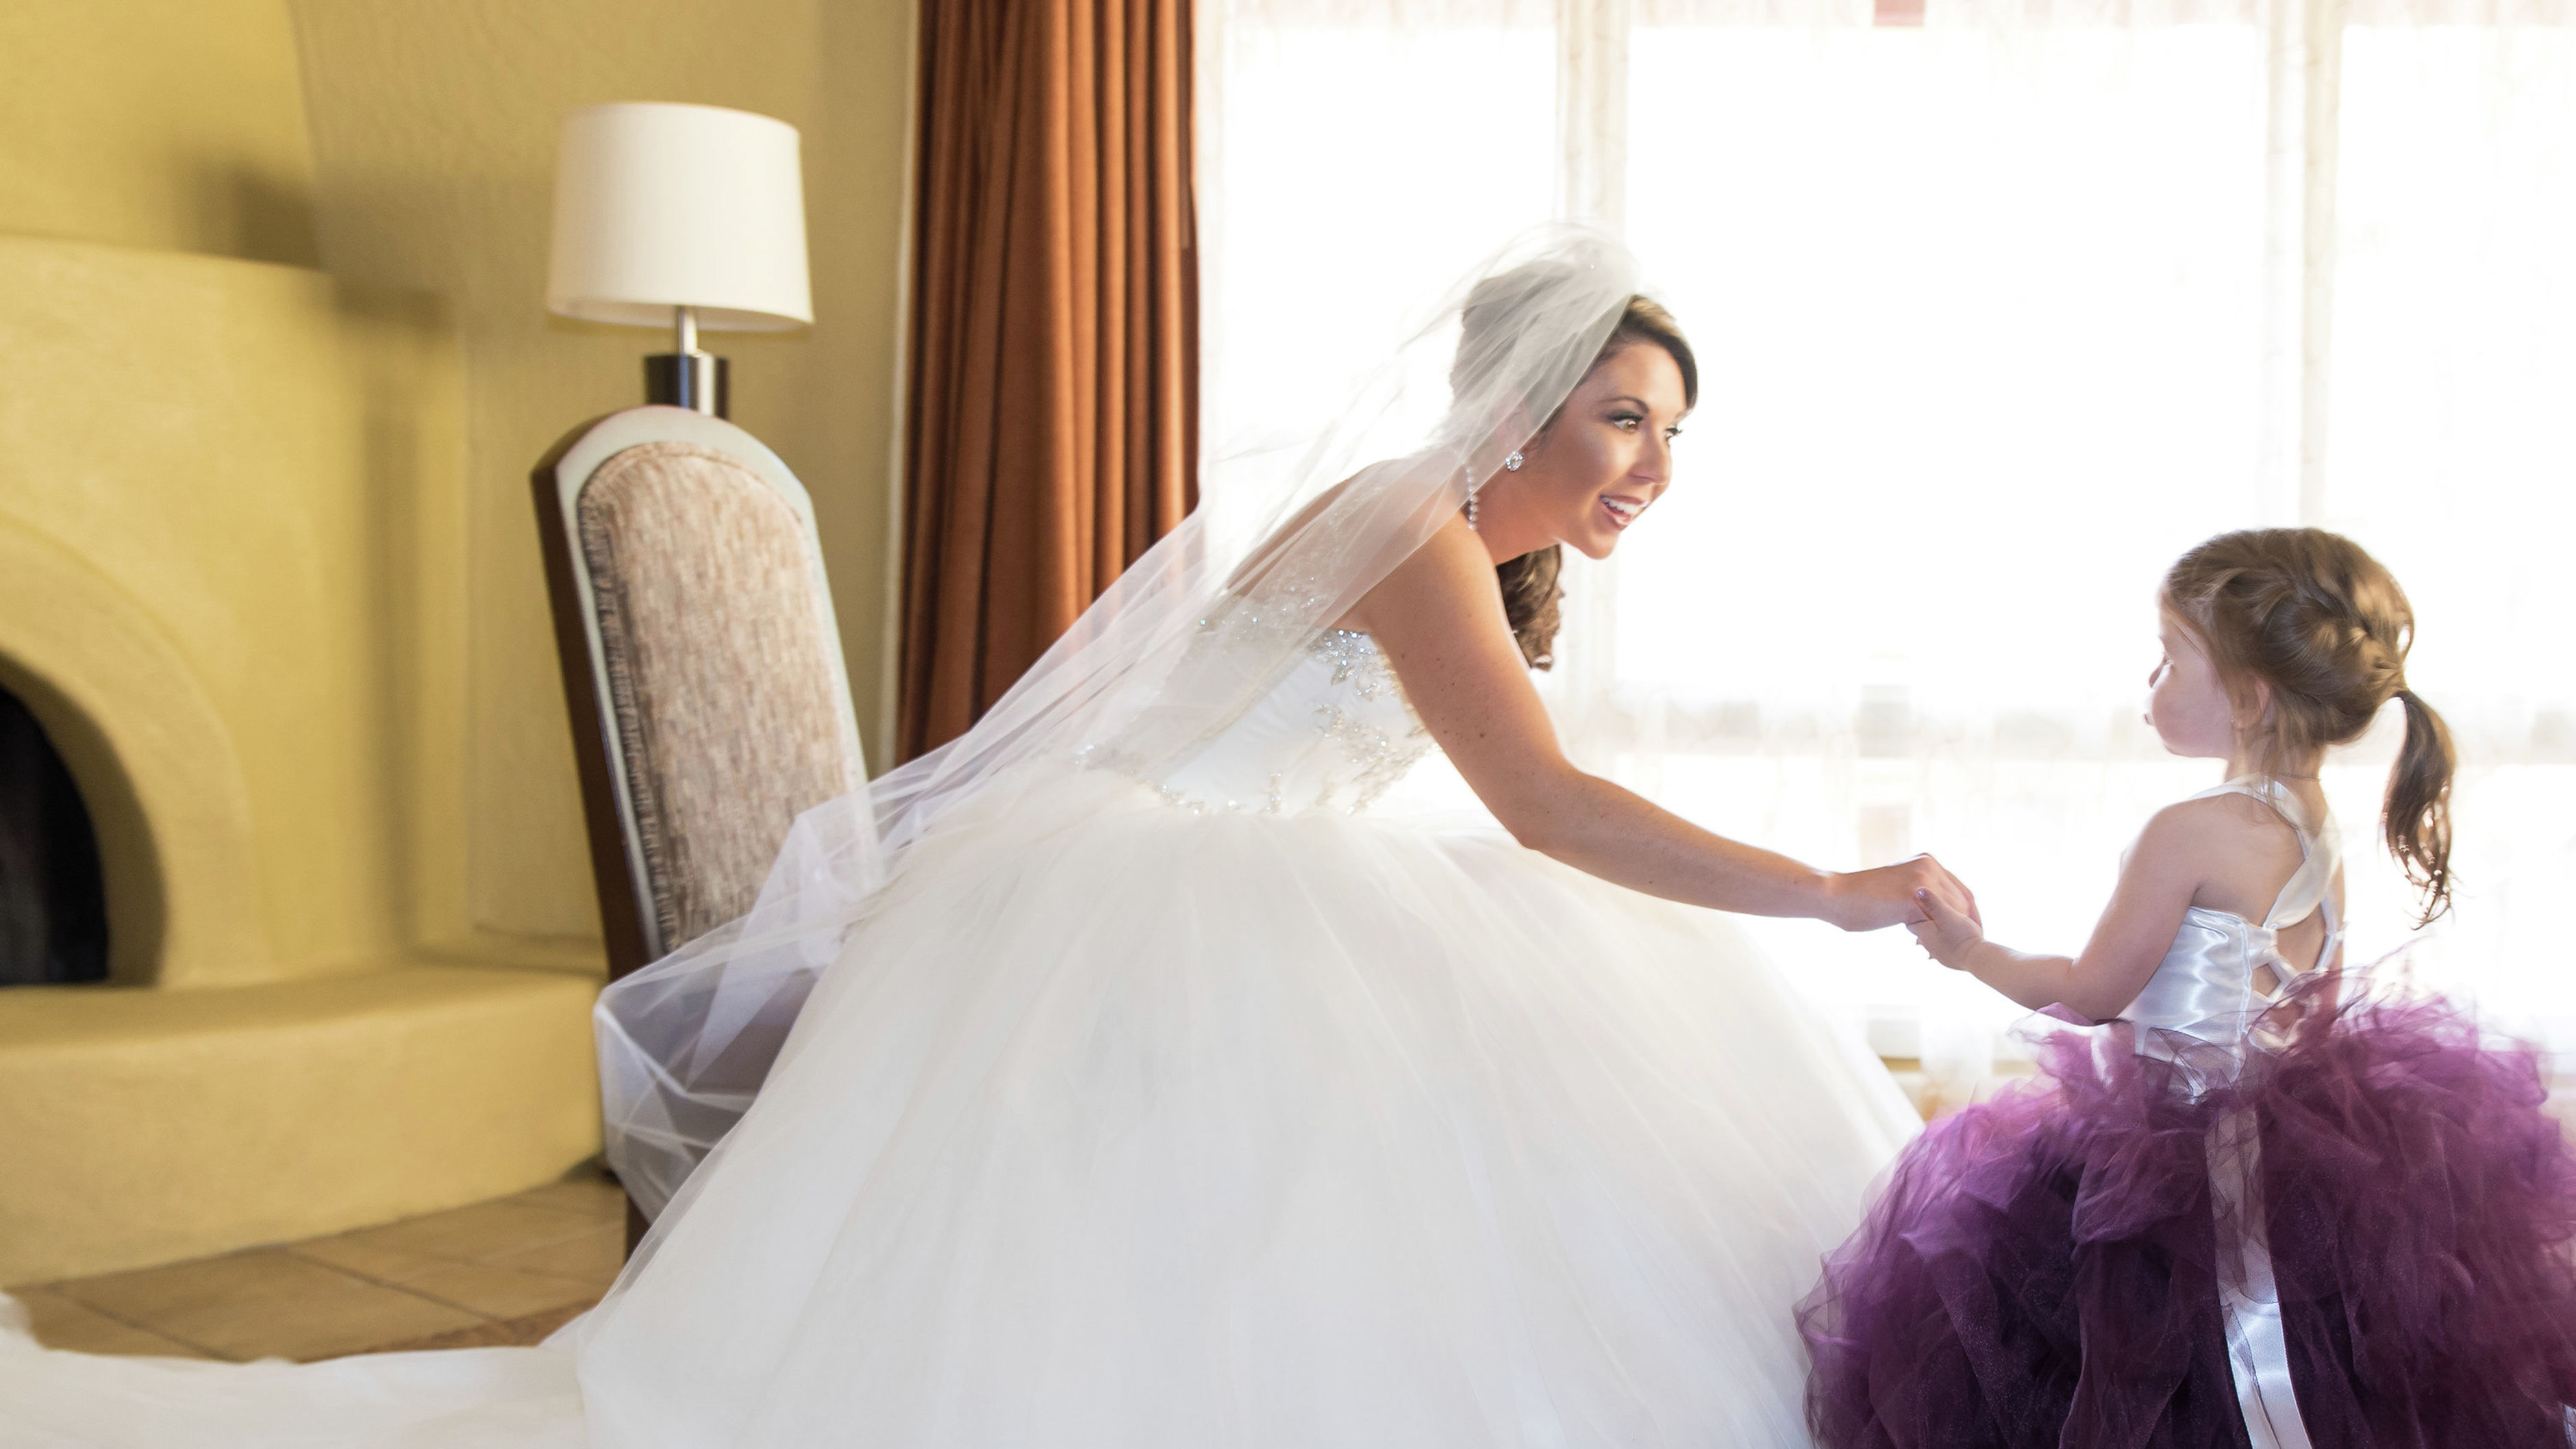 Seated bride in gown holding hand of young flower girl in guest suite